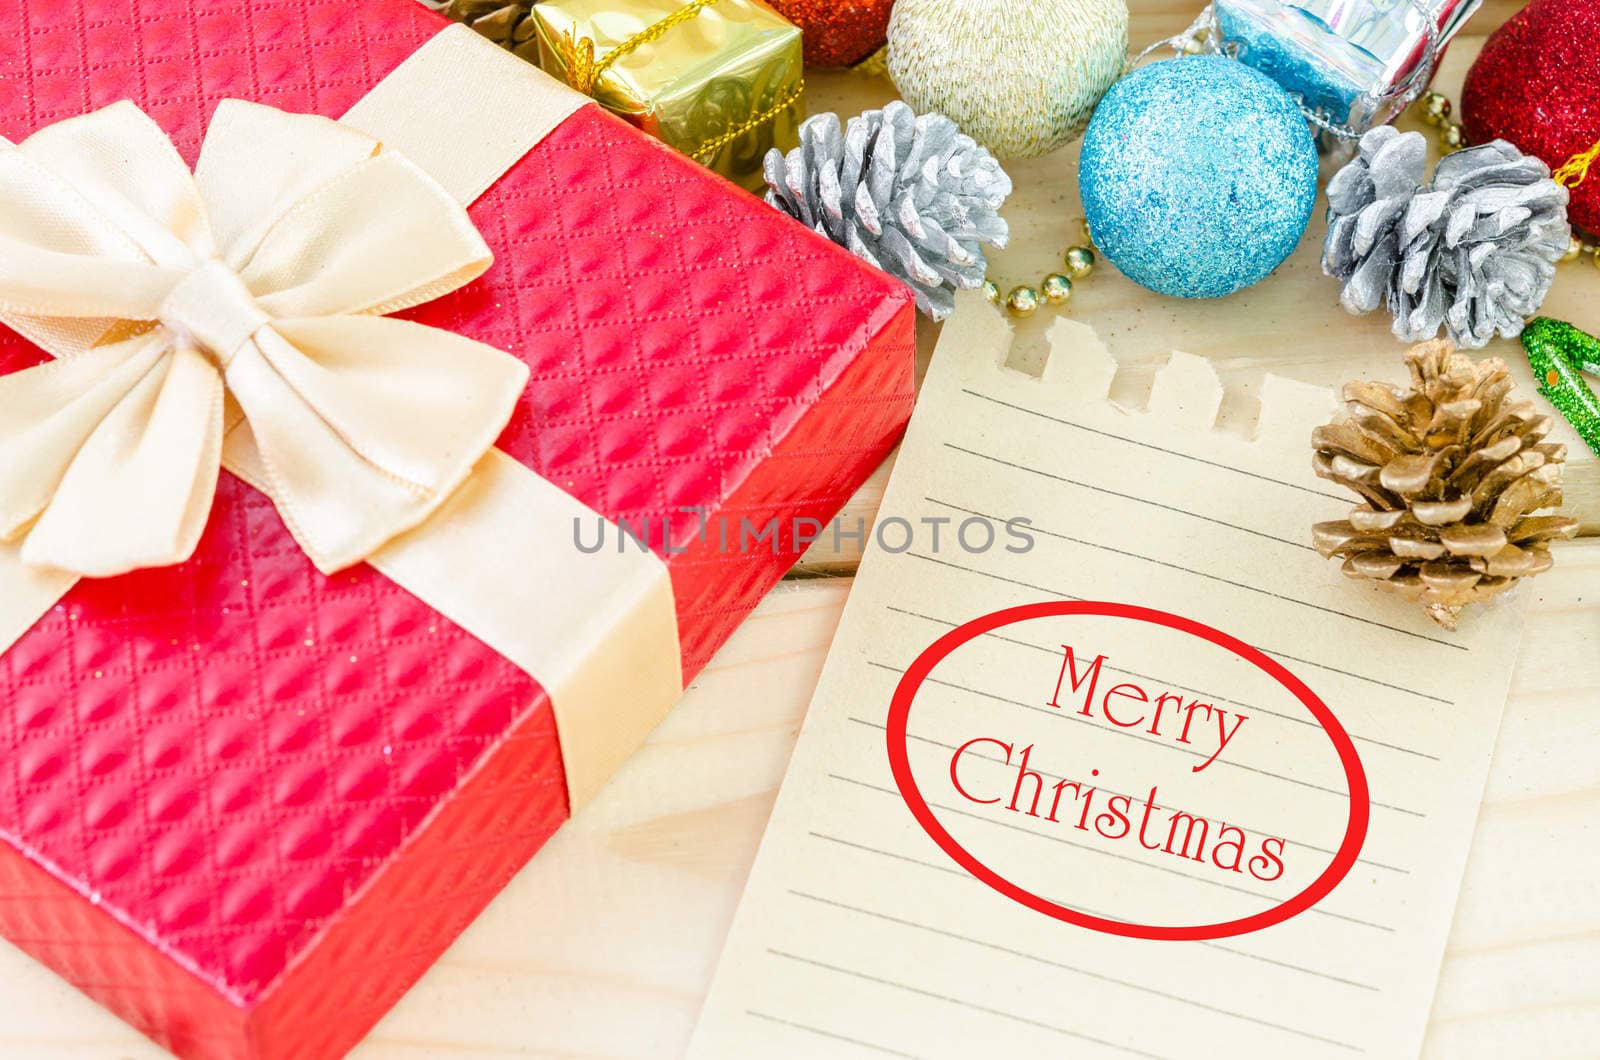 Merry Christmas word writing on brown paper with christmas decorations on wooden background.